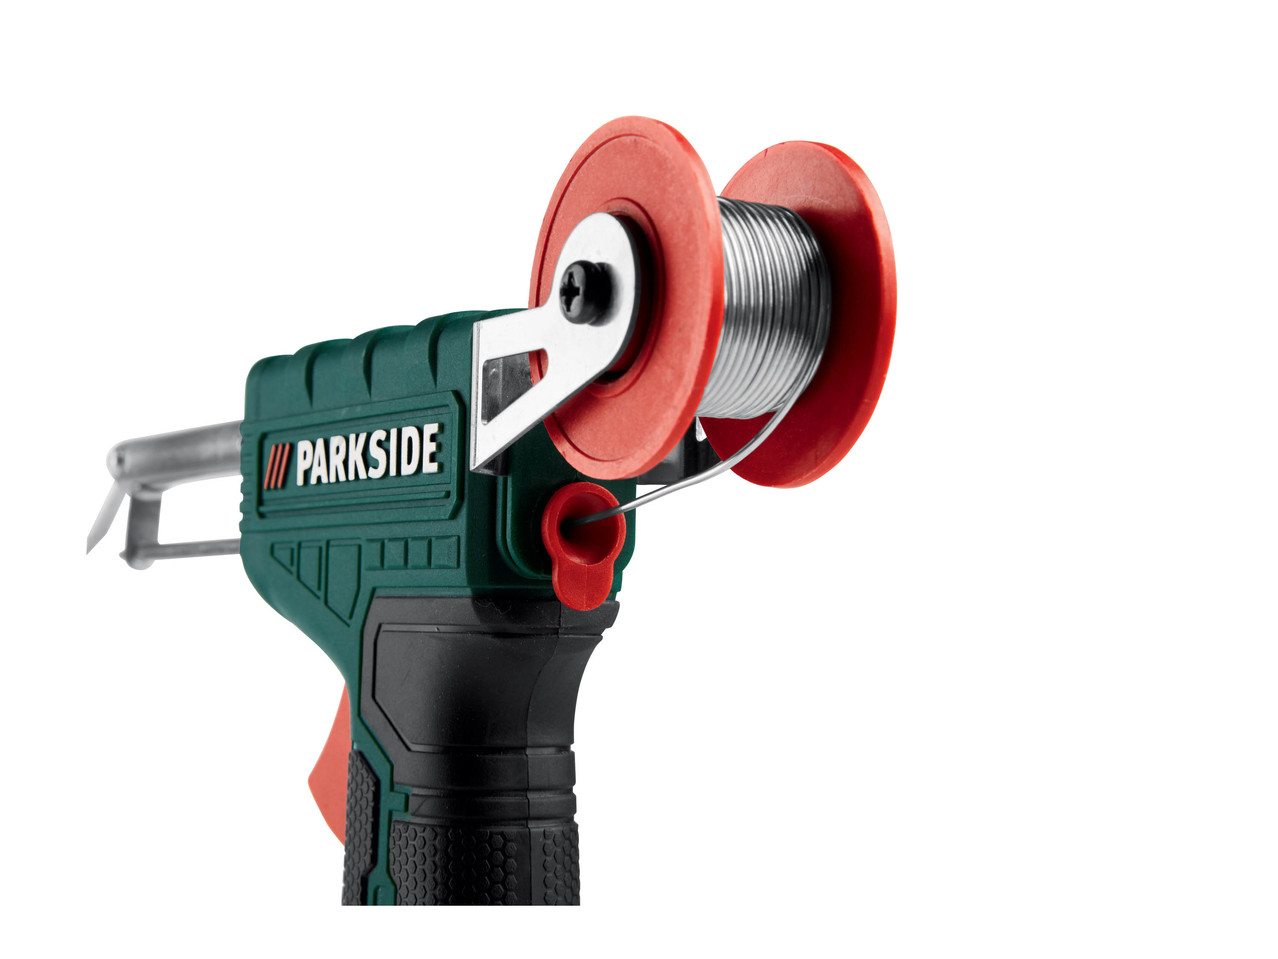 PARKSIDE 60W Soldering Gun with Continuous Solder Feed